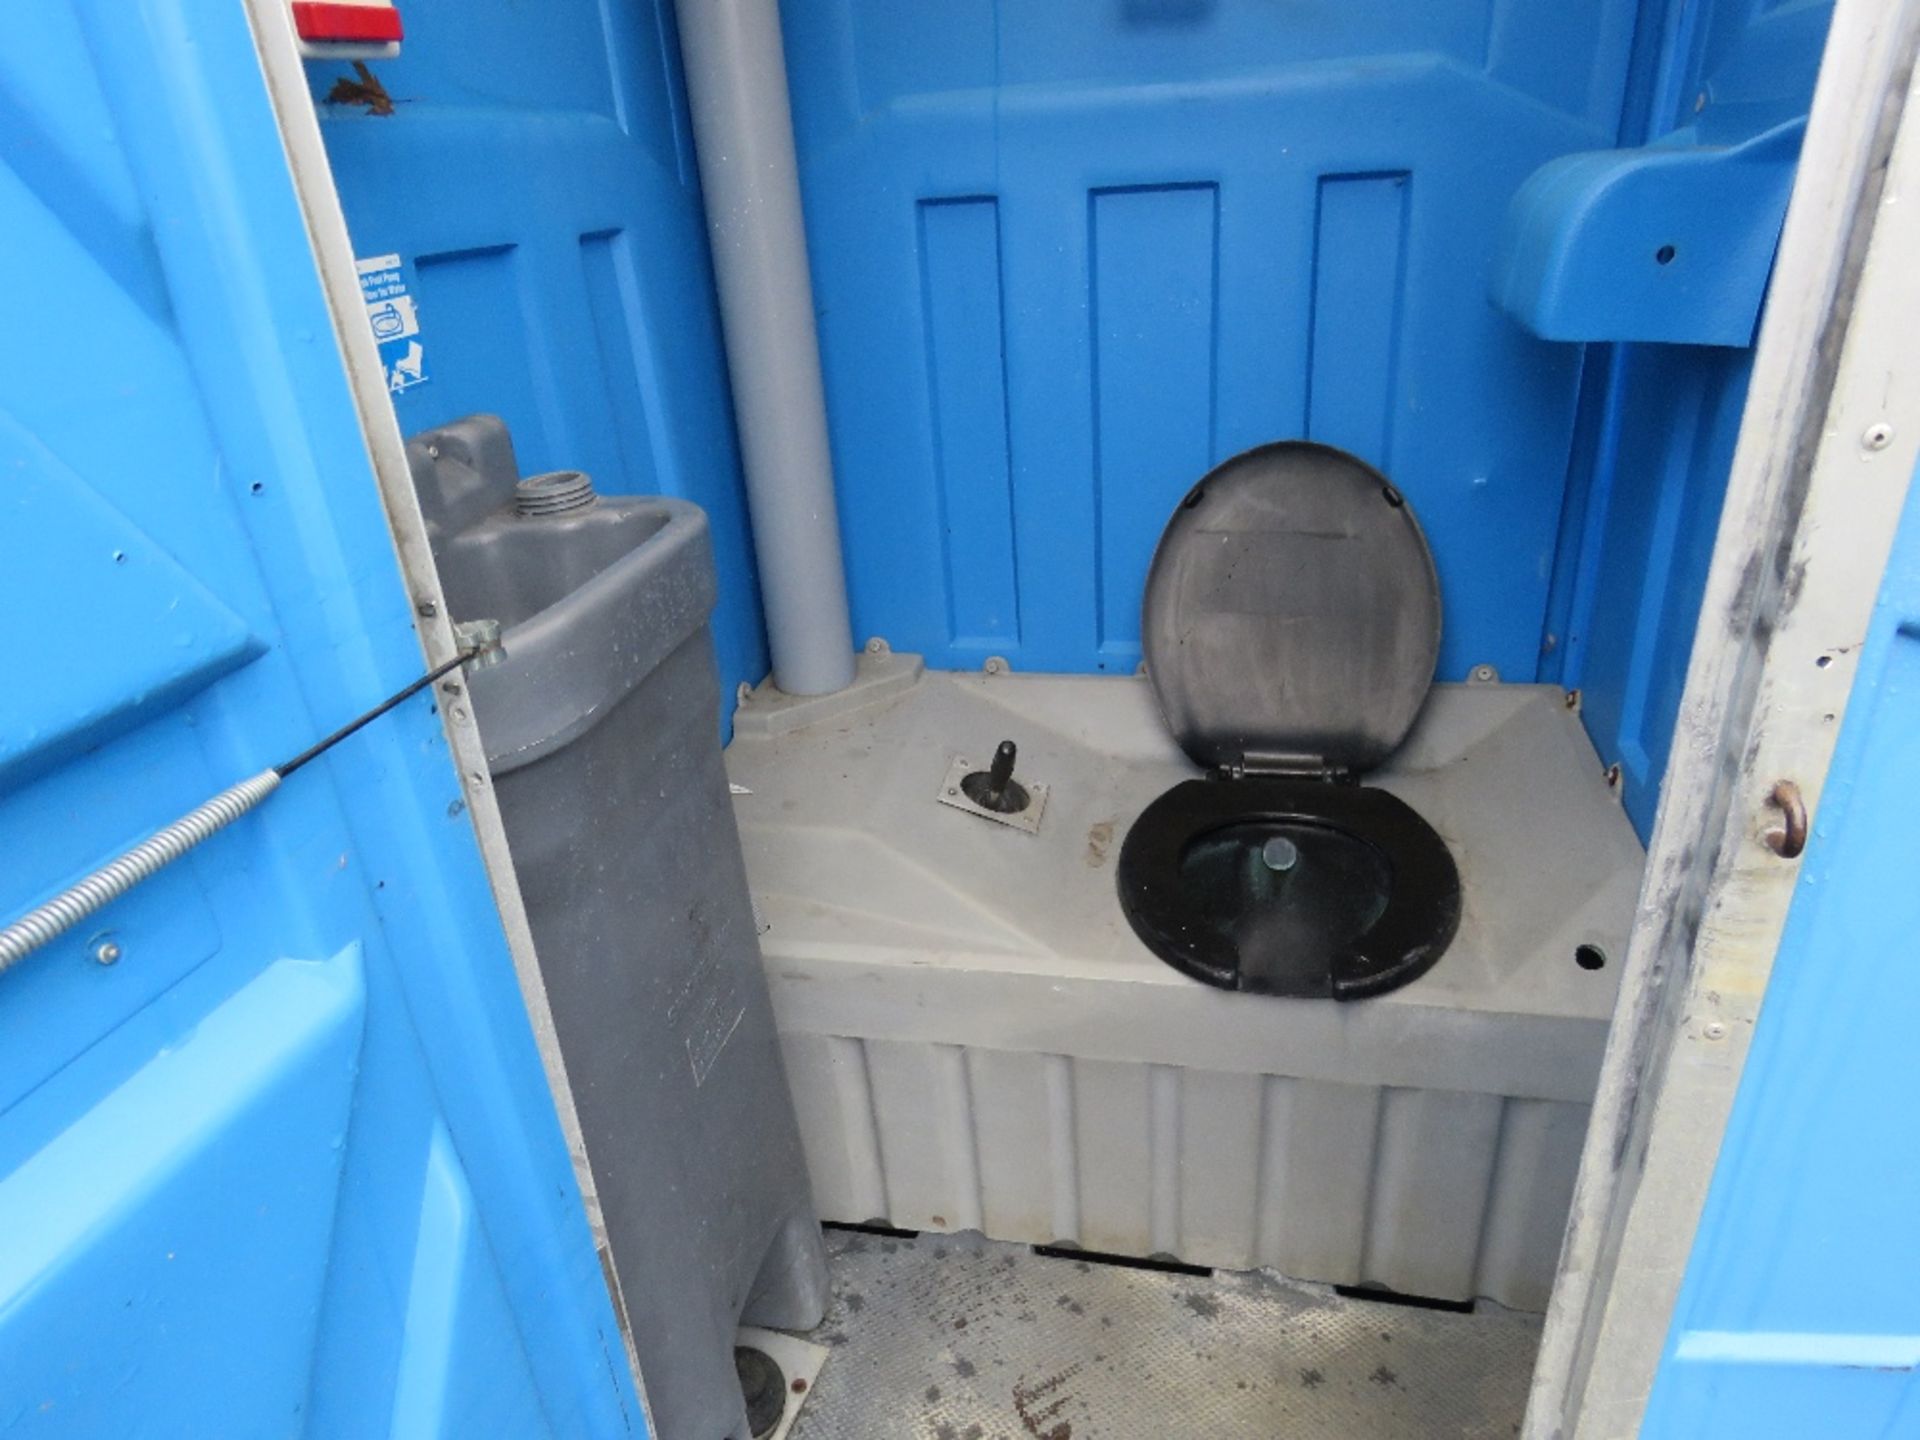 Portable site toilet - Image 3 of 3